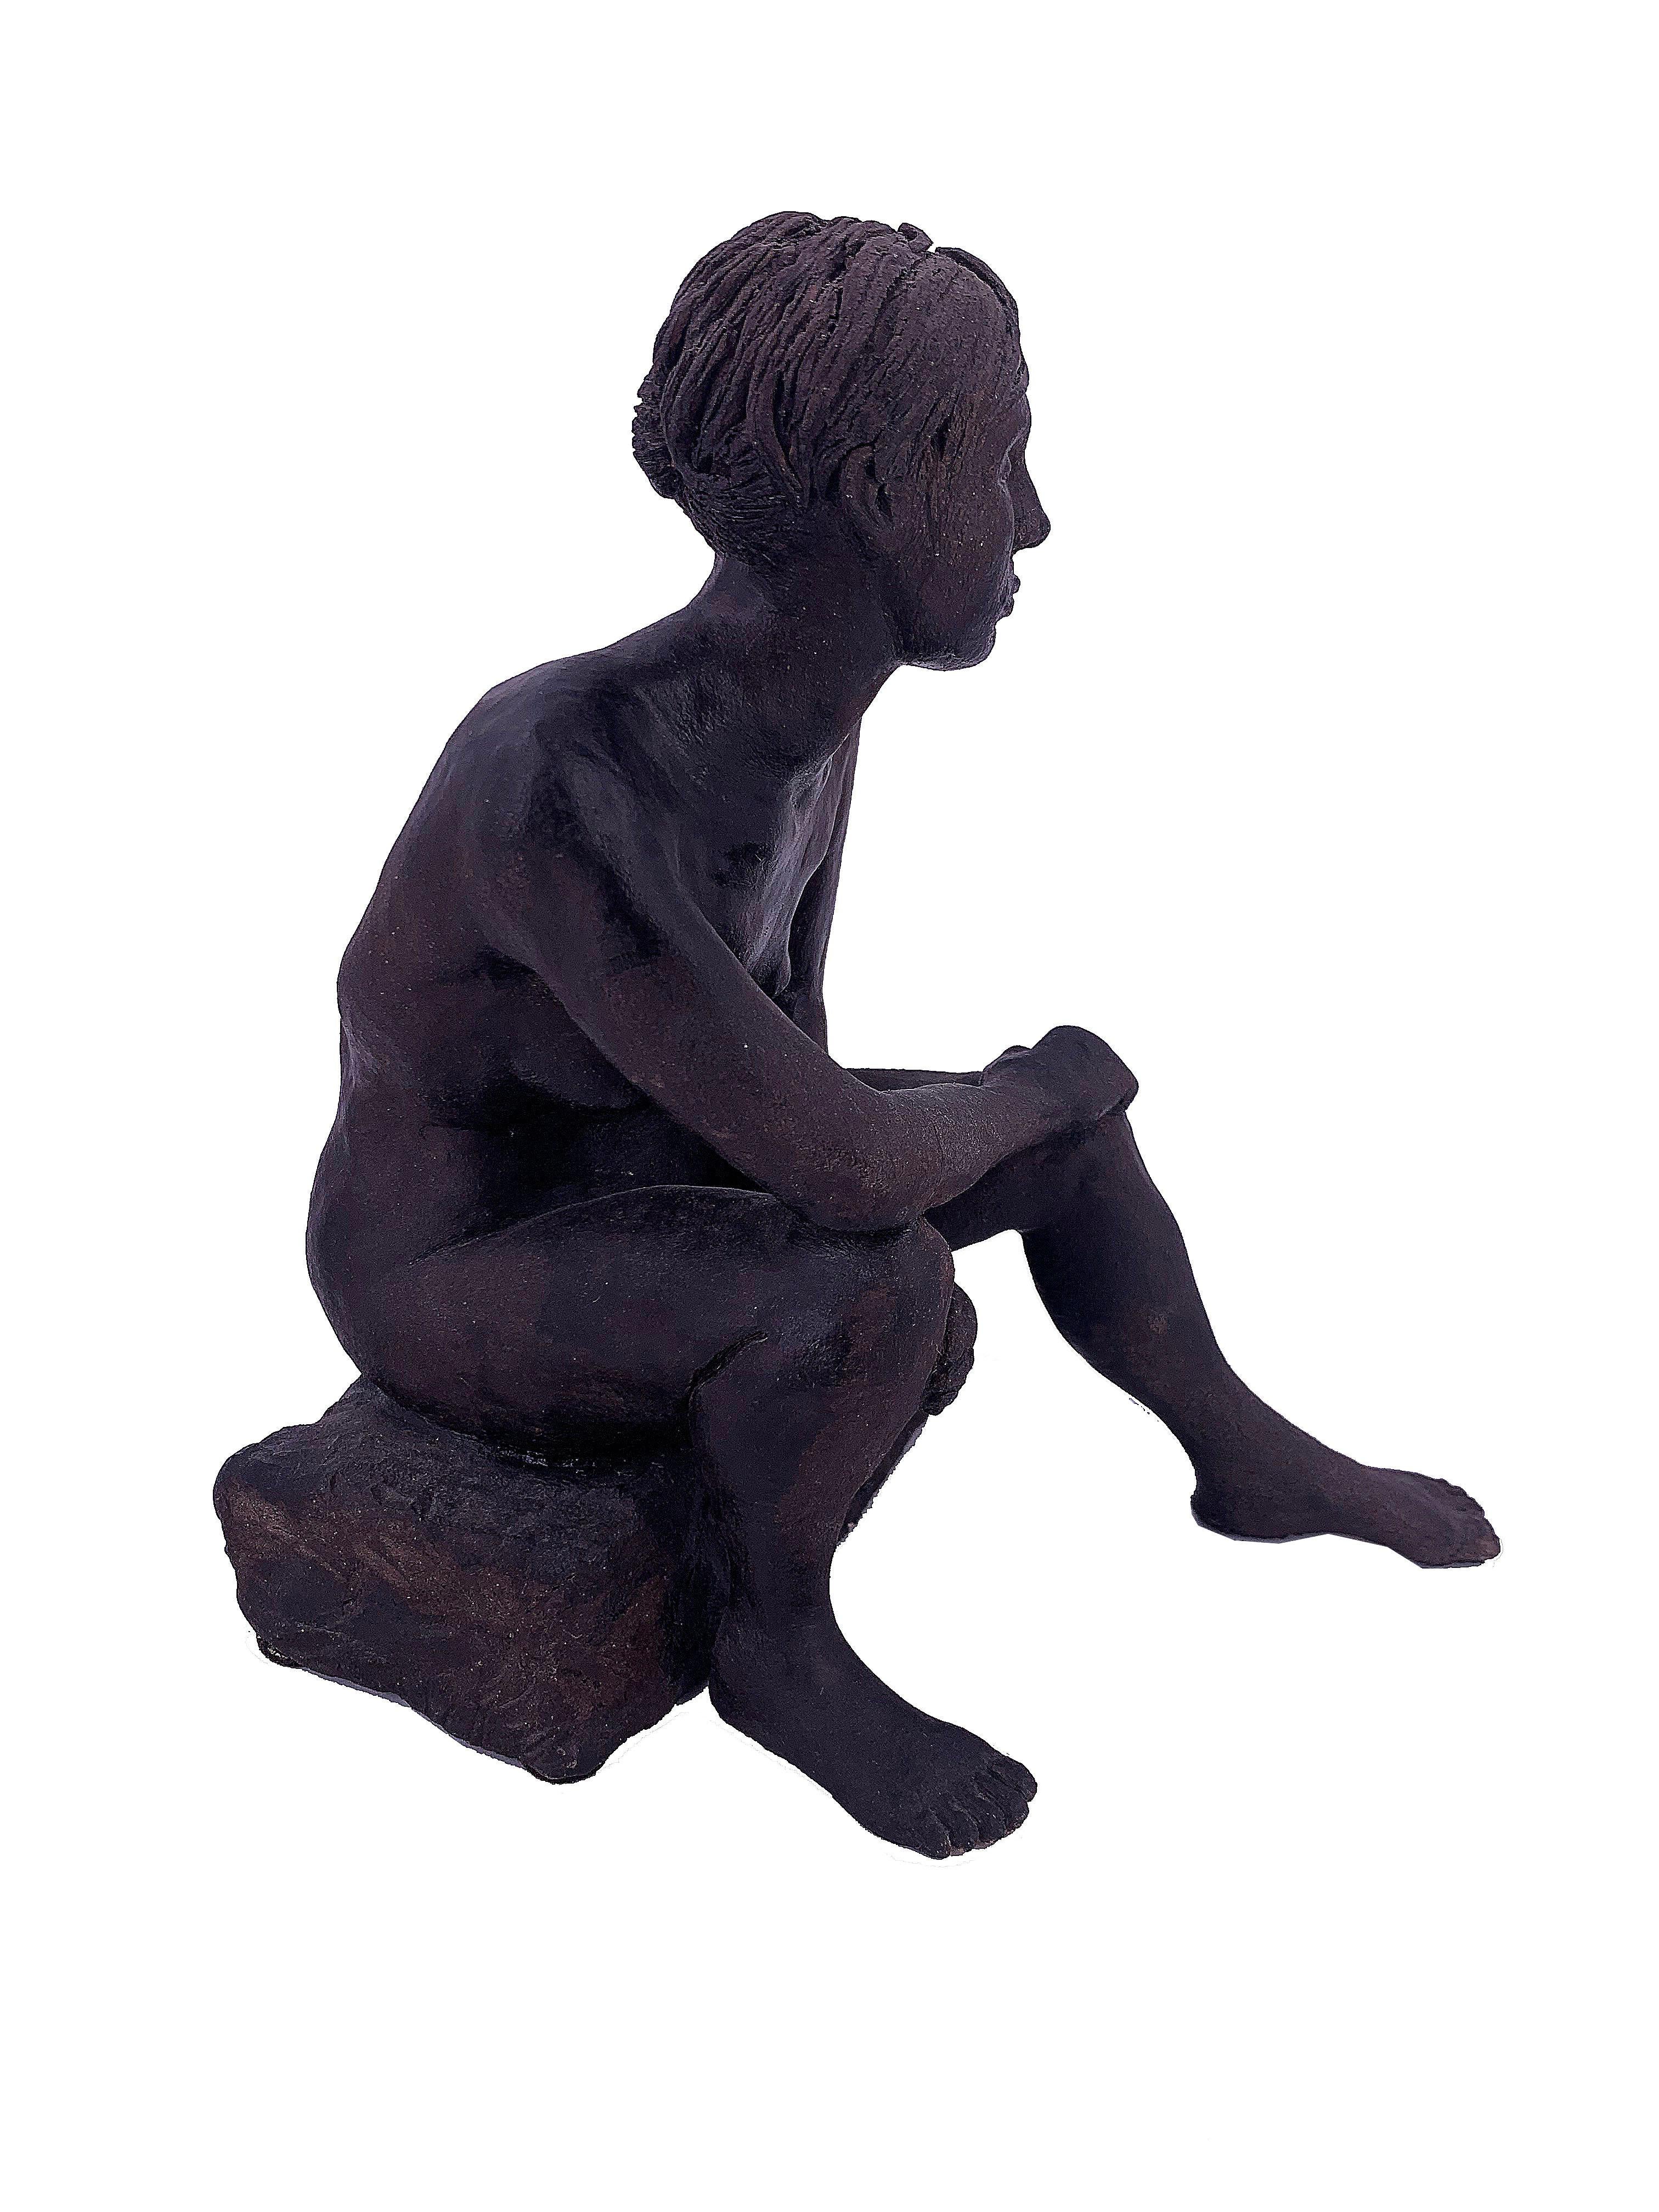 Untitled, Nude Seated Female Sculpture - Gray Figurative Sculpture by Douglas Crozier